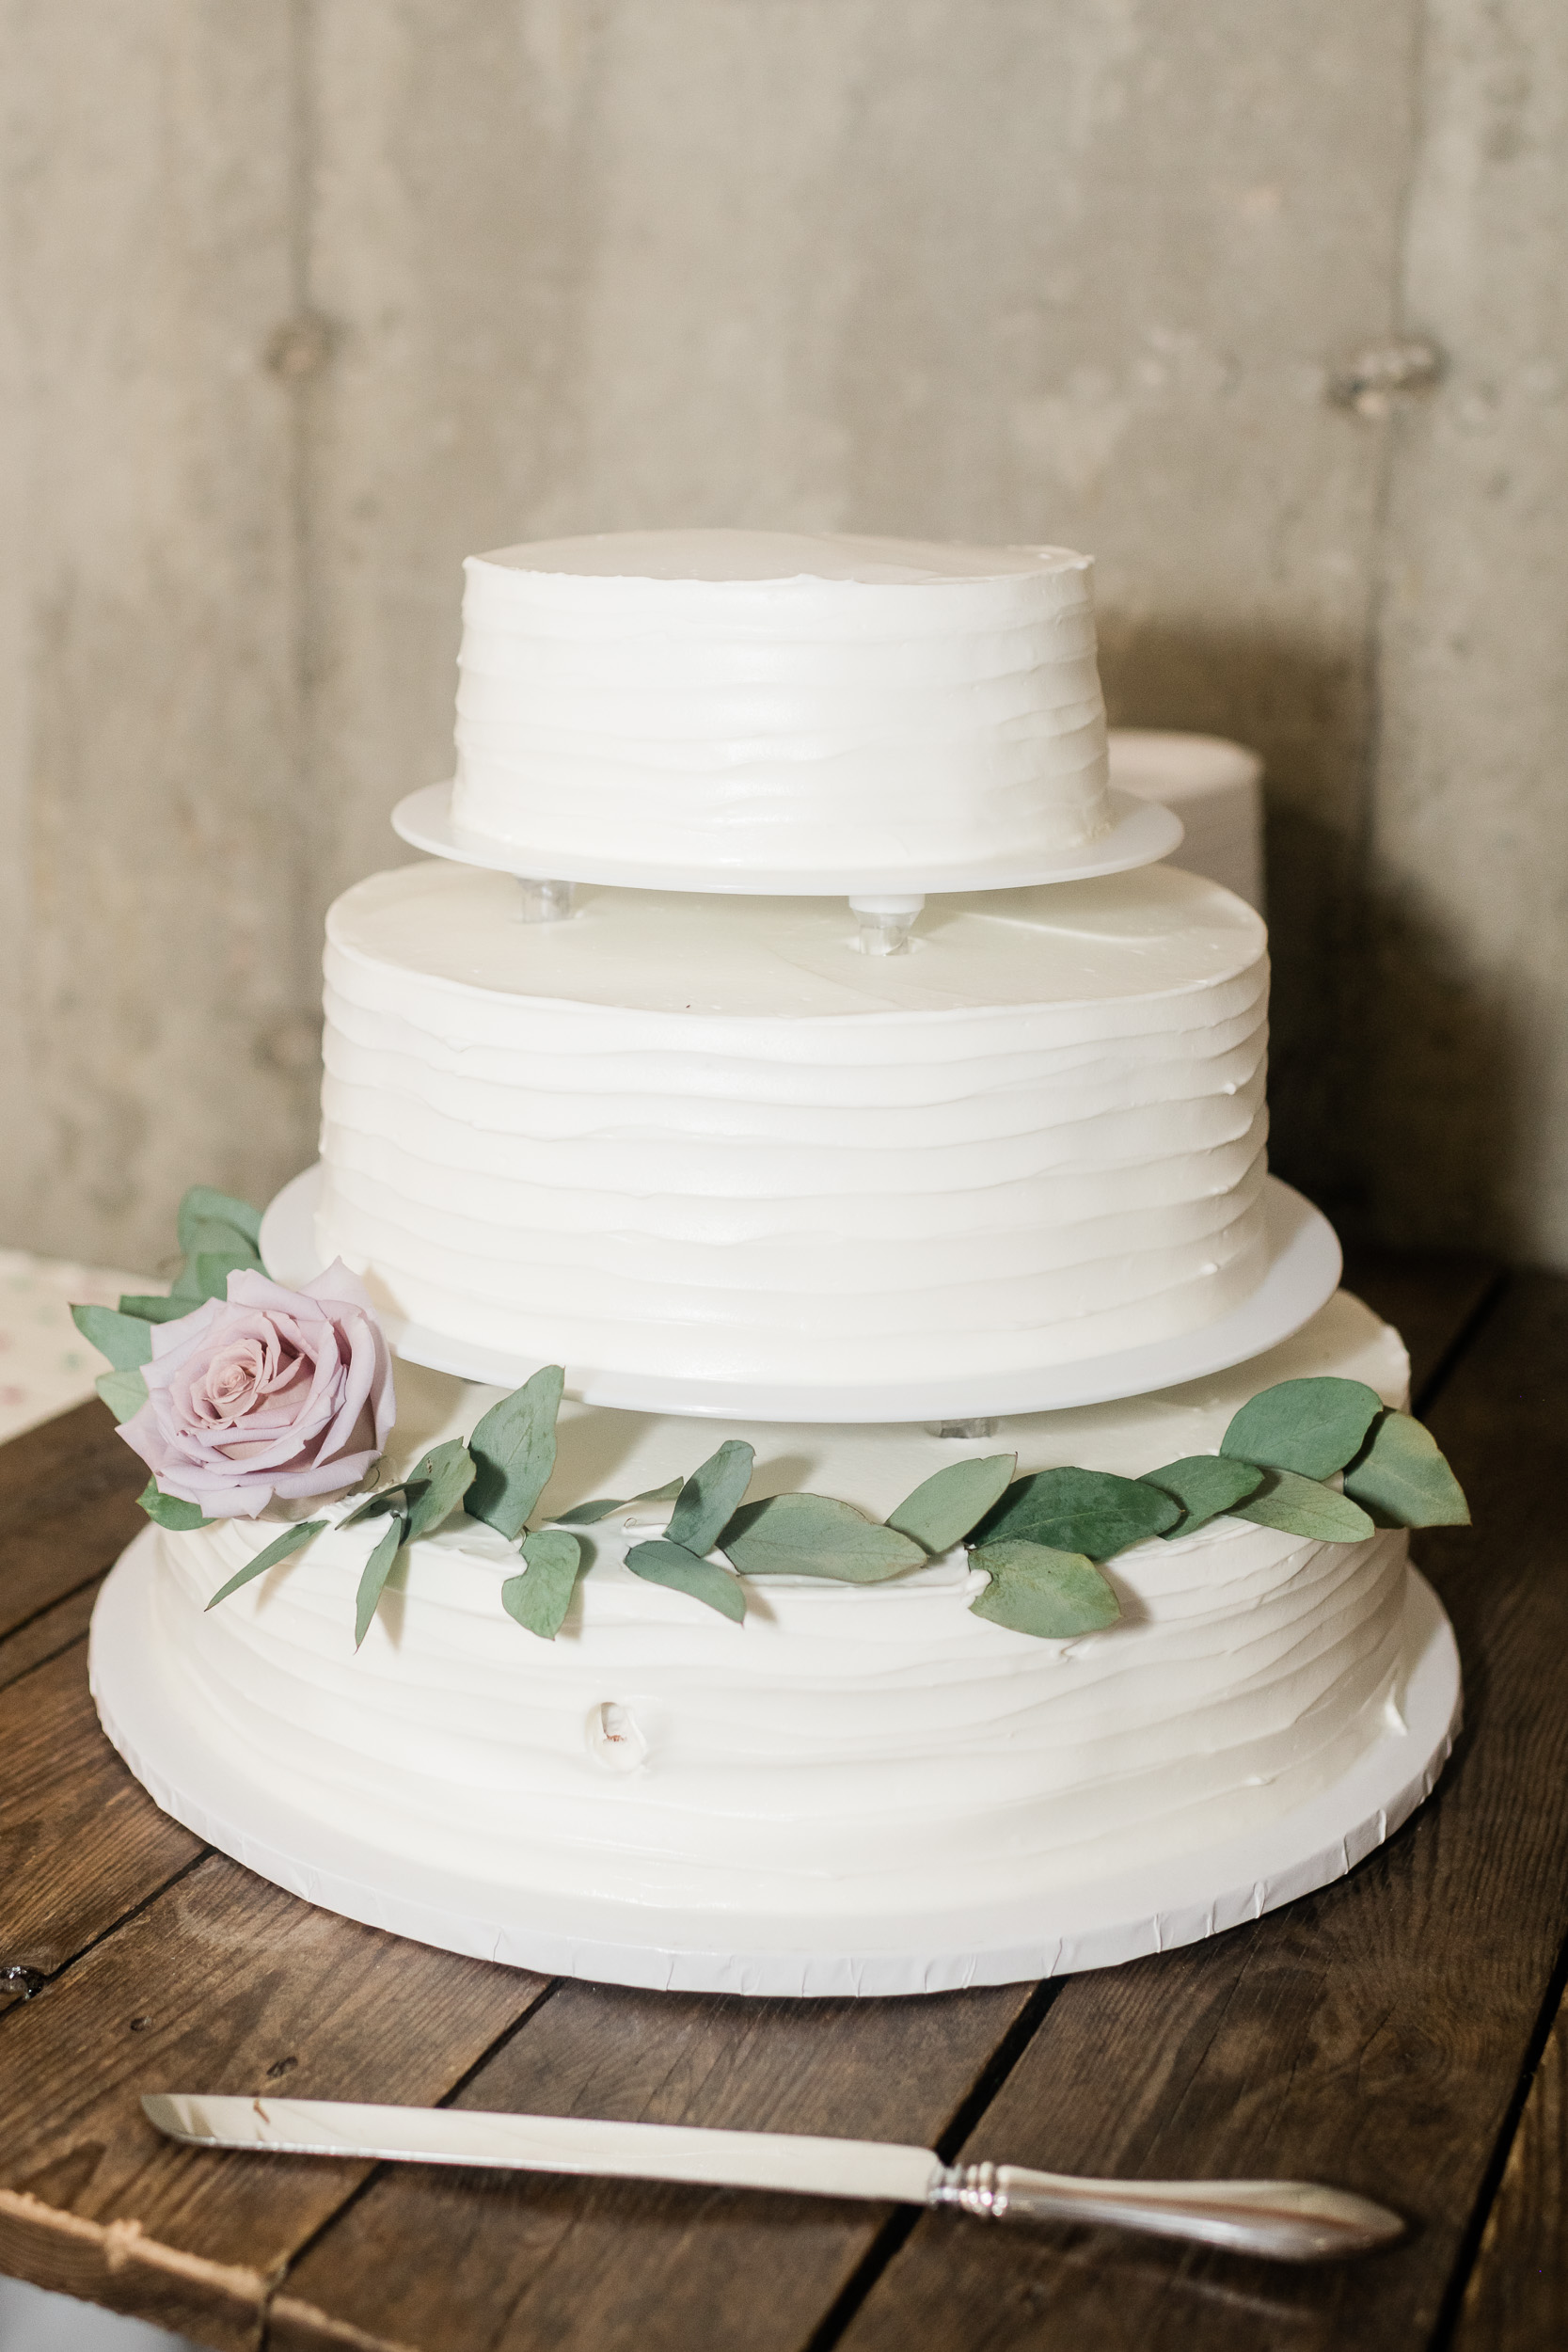 Wedding cake with white frosting and greenery